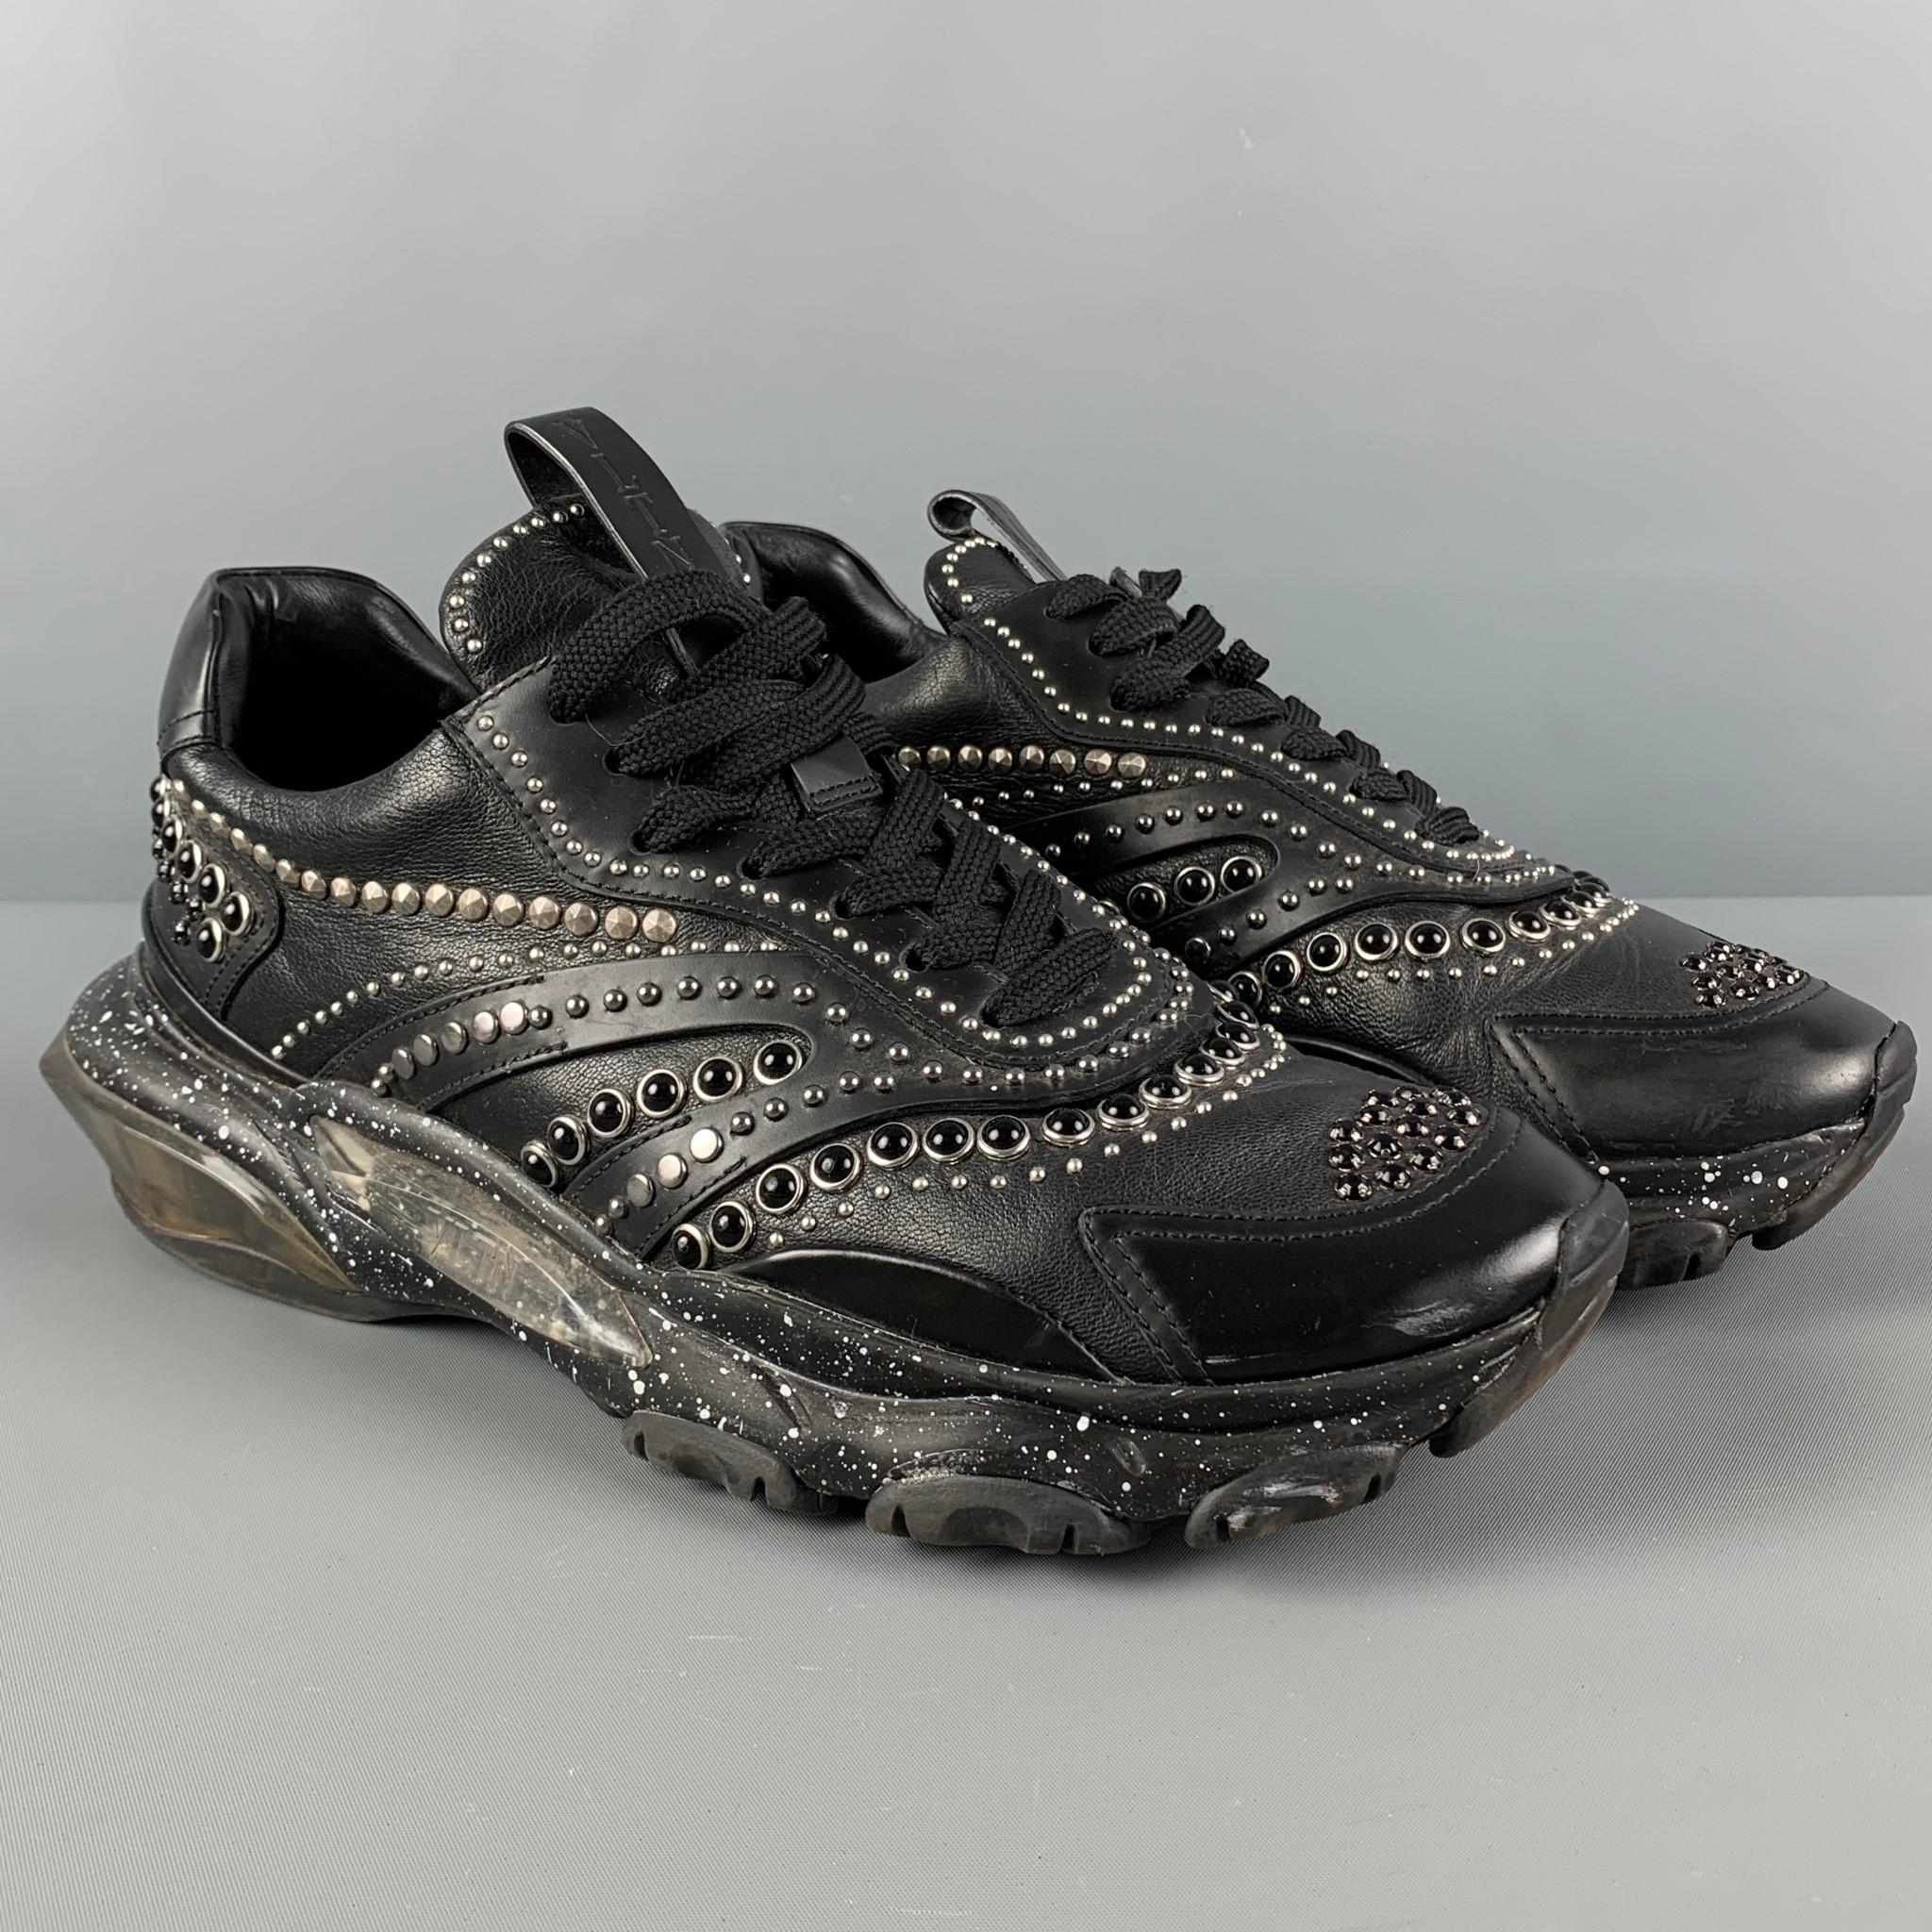 VALENTINO sneakers comes in a black leather featuring a studded design throughout, low-top, chunky sole, and a lace up closure. Made in Italy.

Very Good Pre-Owned Condition.
Marked: LSQB05Y2 41
Original Retail Price: $1,220.00

Outsole: 12 in. x